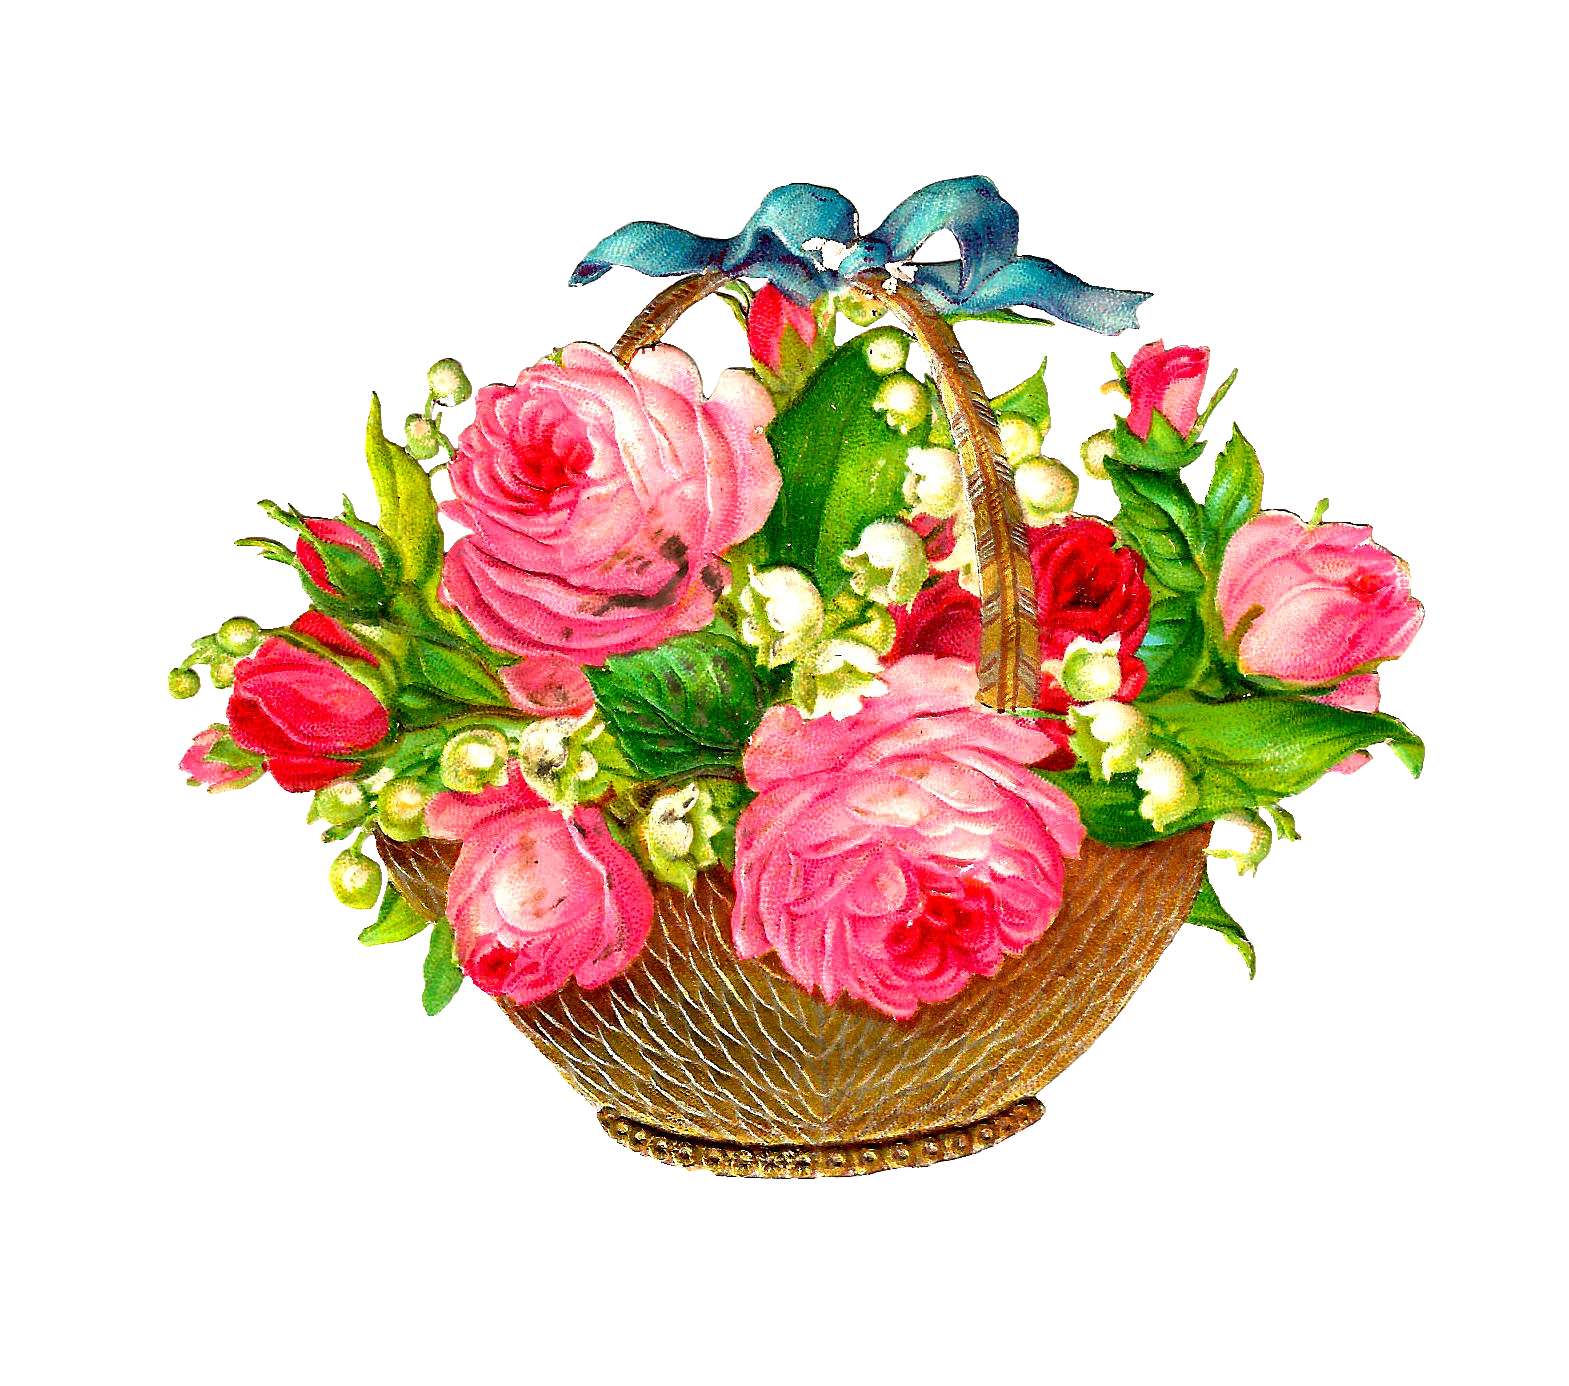 Bouquet Of Roses PNG HD - 142833